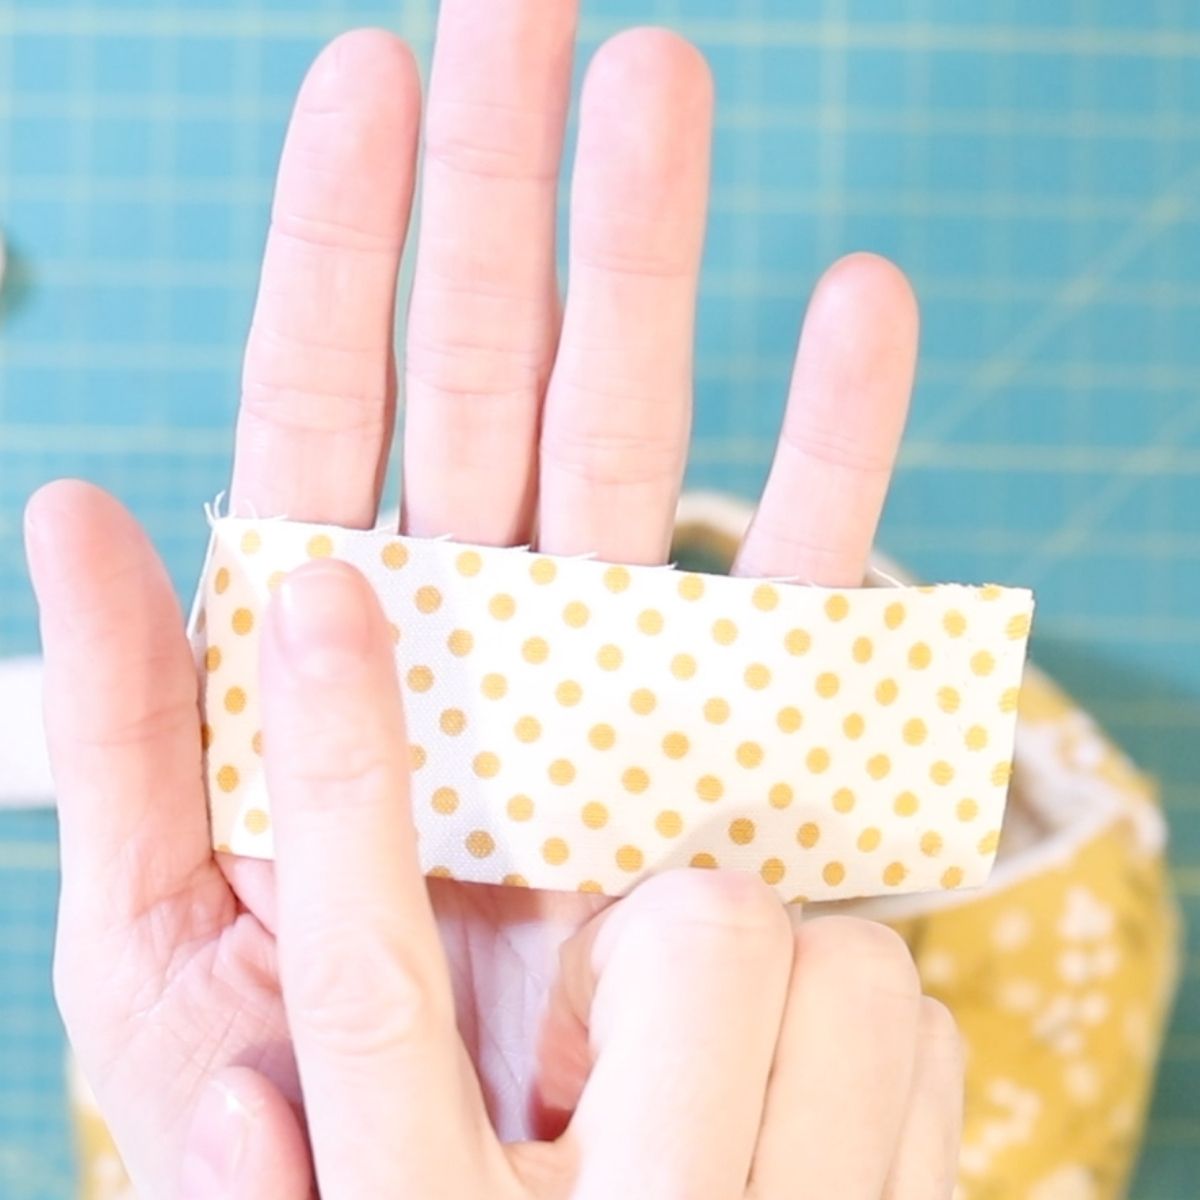 a handing holding a strip of yellow and white polka doted fabric binding pointing to the raw edge of the fabric